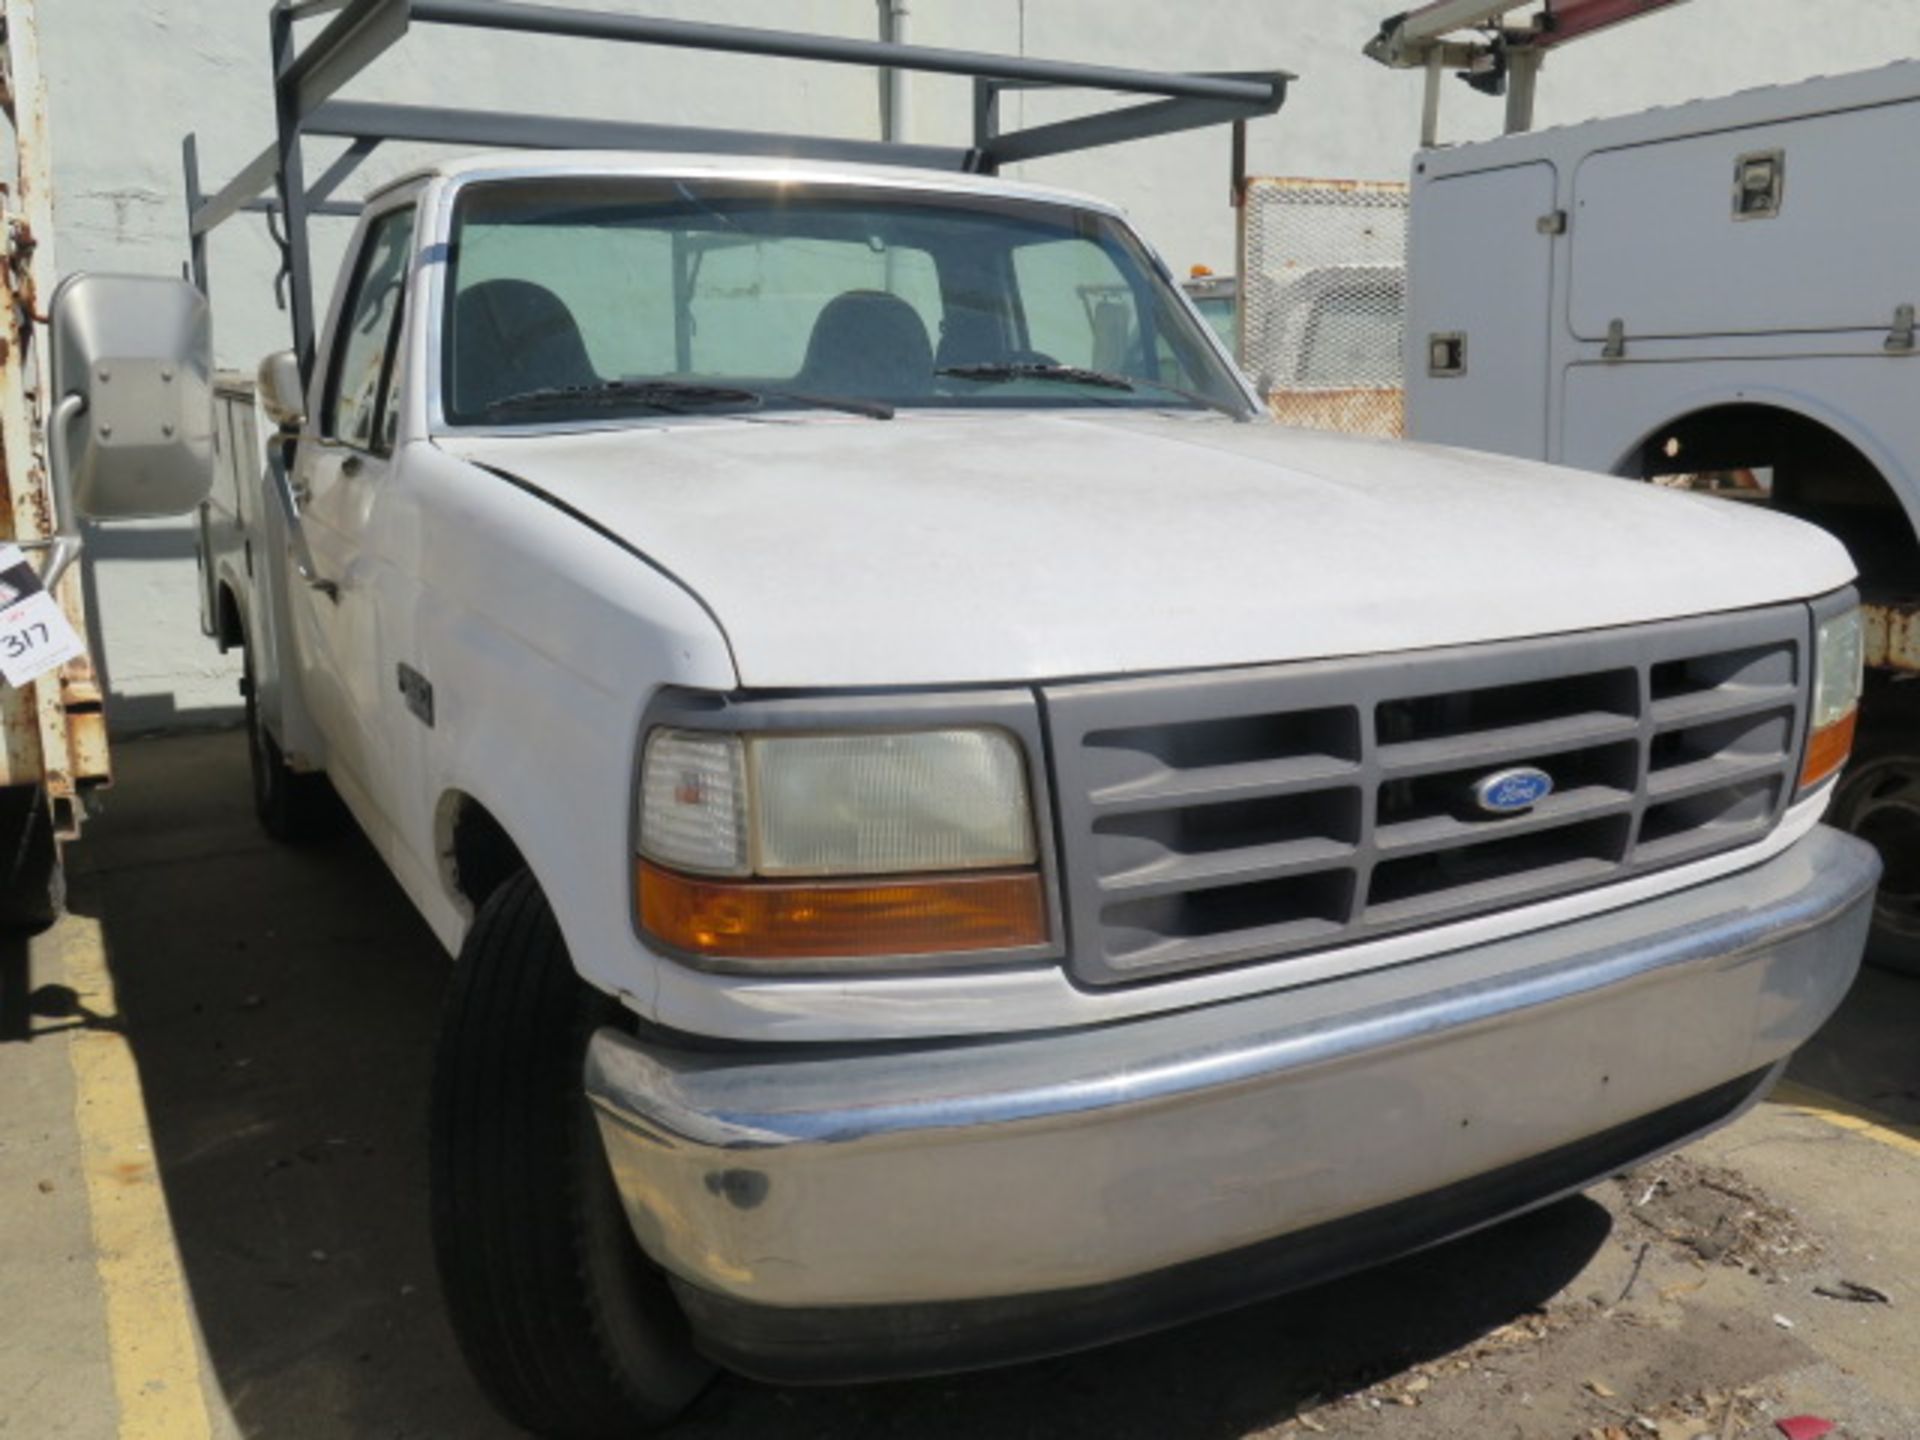 1995 Ford F-250XL Service Truck w/ Gas Engine, Automatic Trans, AC Vin# 1FTEF25N15NB11666,SOLD AS IS - Image 3 of 11